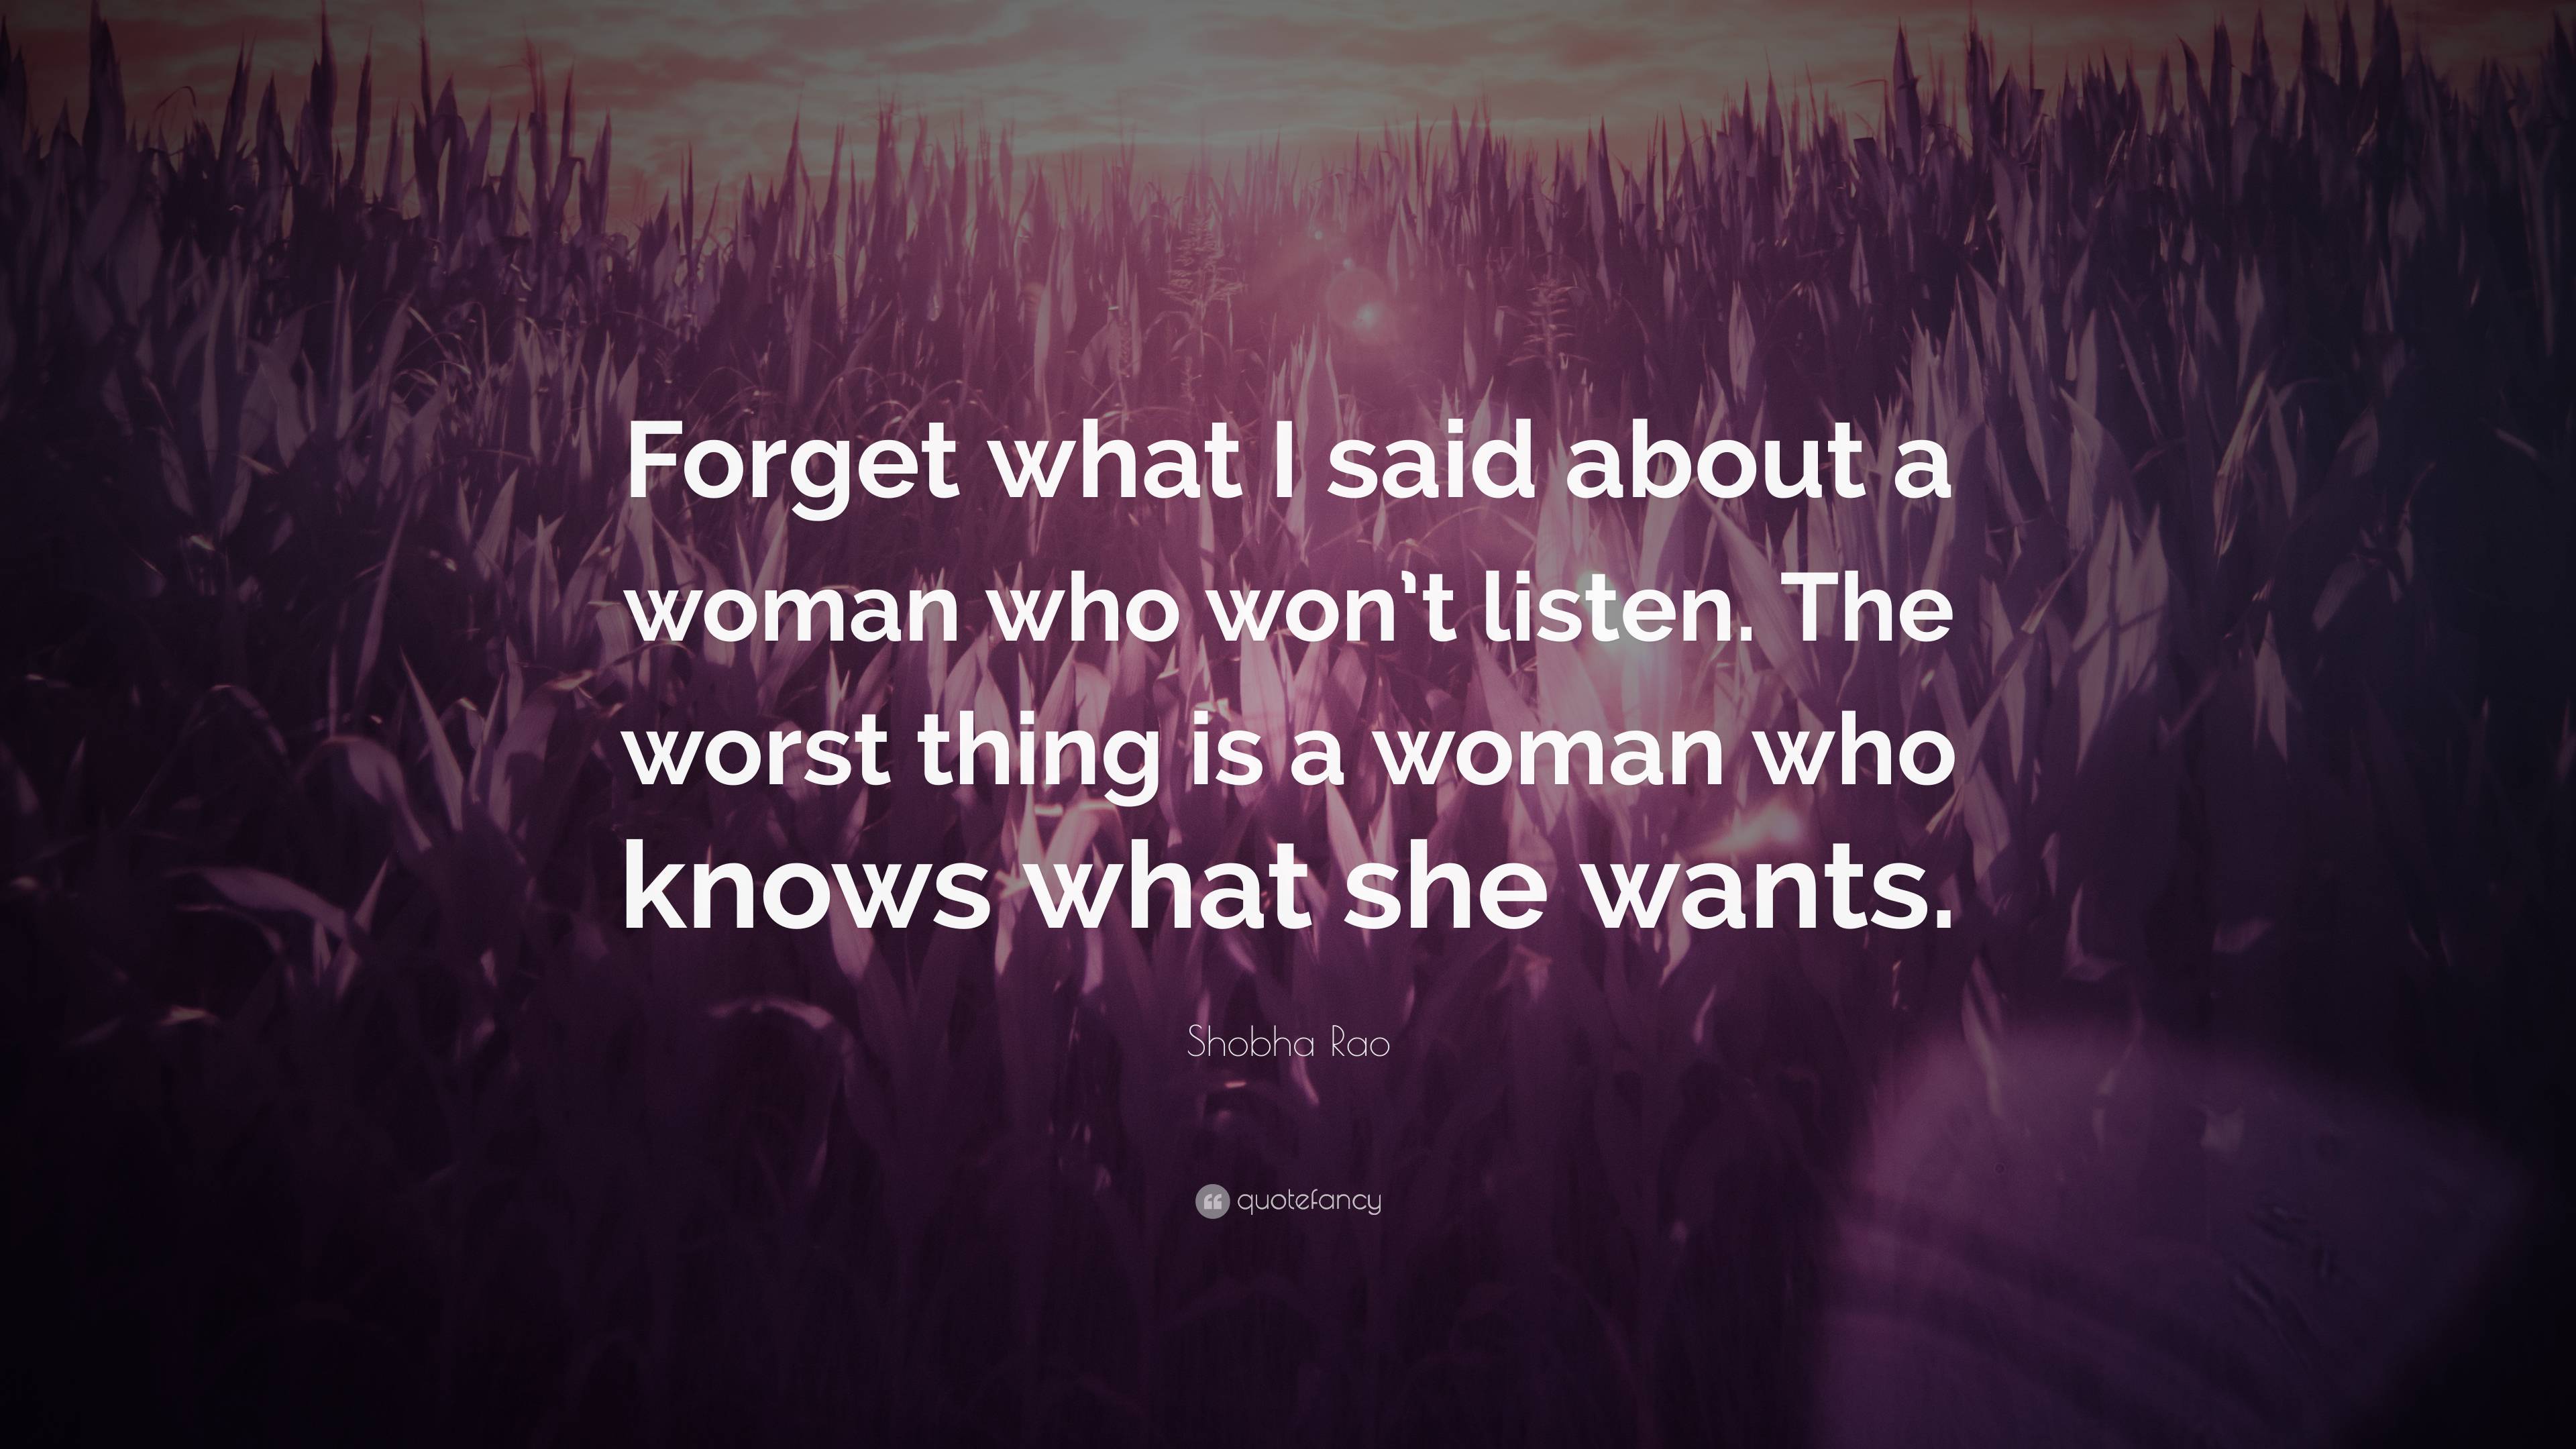 Shobha Rao Quote: “Forget what I said about a woman who won’t listen ...